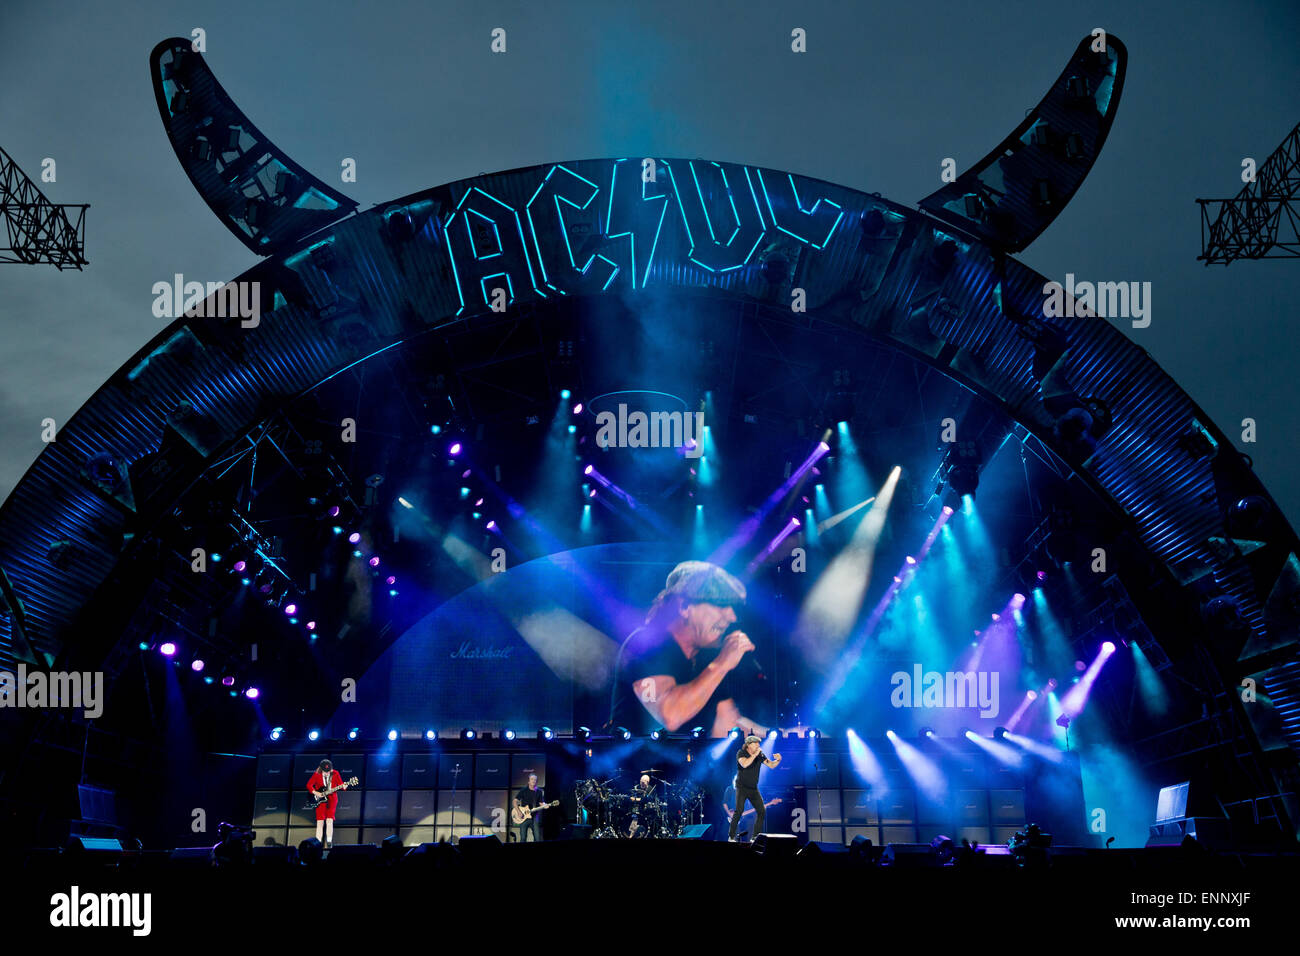 Nuremberg, Germany. 8th May, 2015. Singer of the Australian rock band AC/DC, Brian Johnson (r), and guitarist Angus Young on stage at the start of their German tour in Nuremberg, Germany, 8 May 2015. Photo: Daniel Karmann/dpa/Alamy Live News Stock Photo